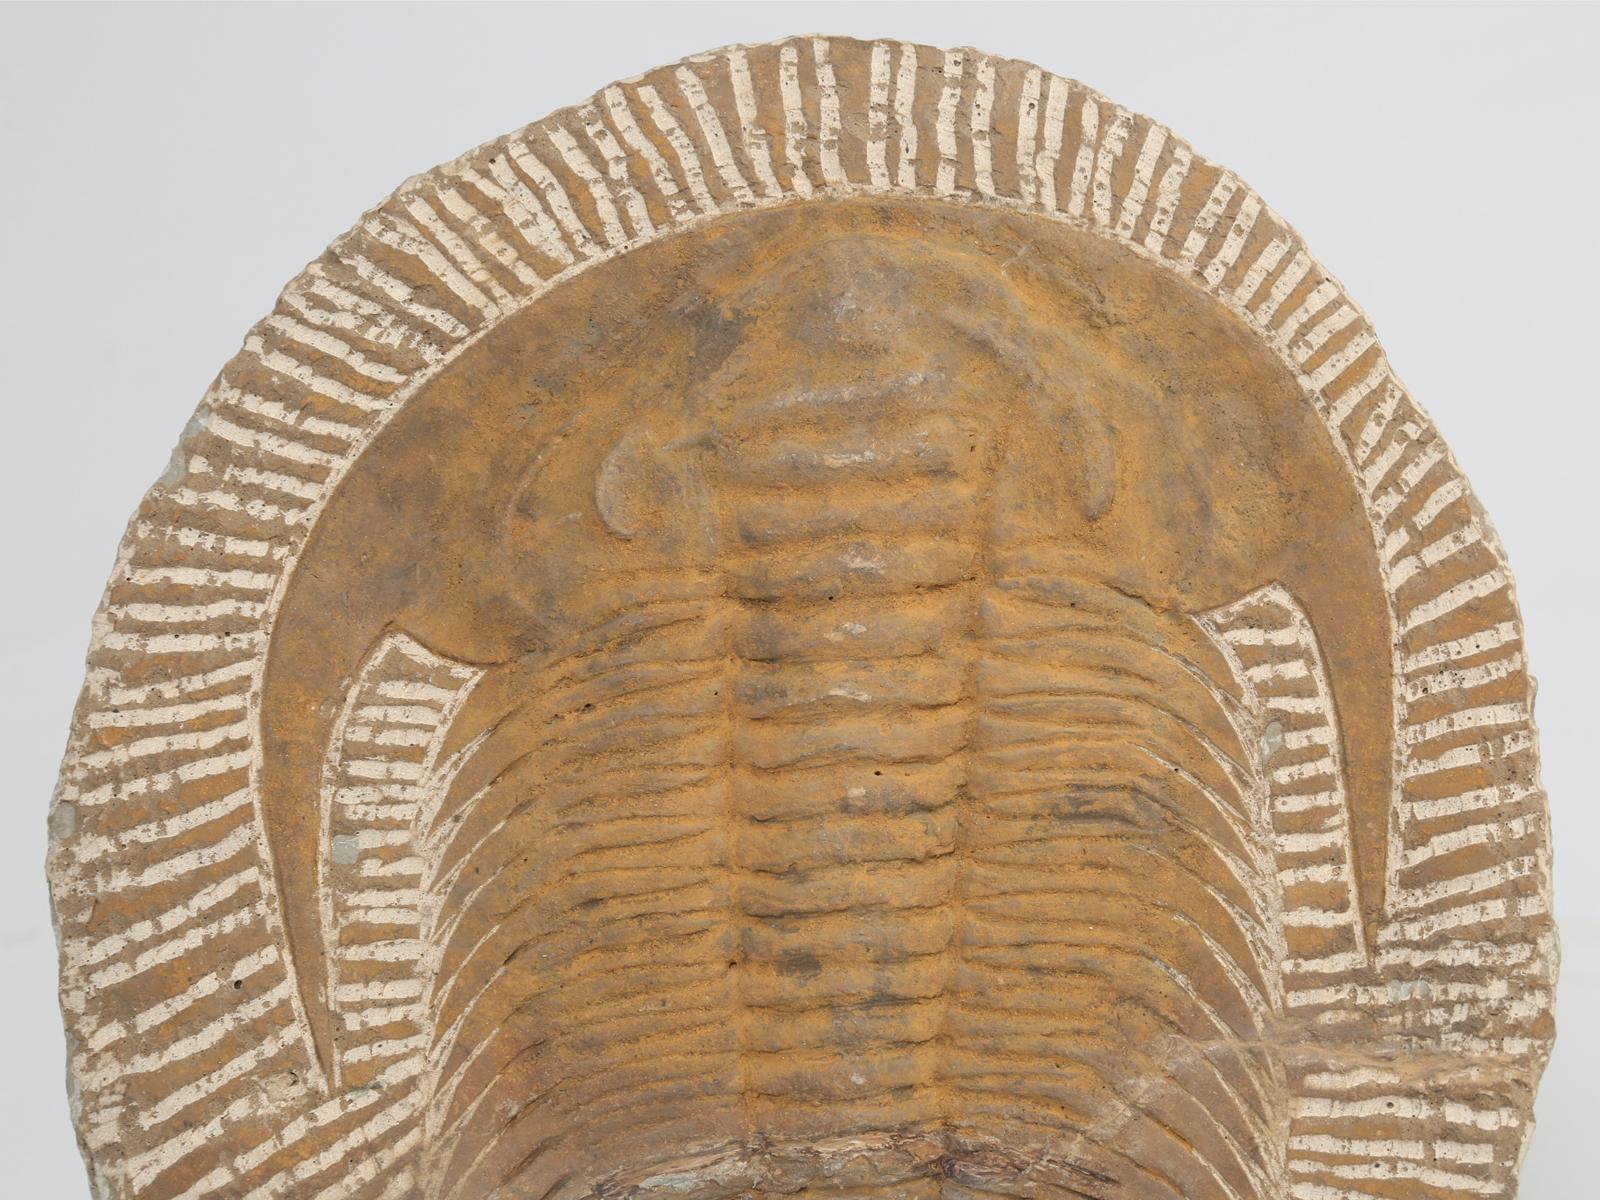 Trilobites, existing today only in fossil form, was an early arthropod. When life exploded into animal form marking the beginning of the Paleozoic, it was this prolific arthropod that became the signpost for the era. It came into existence